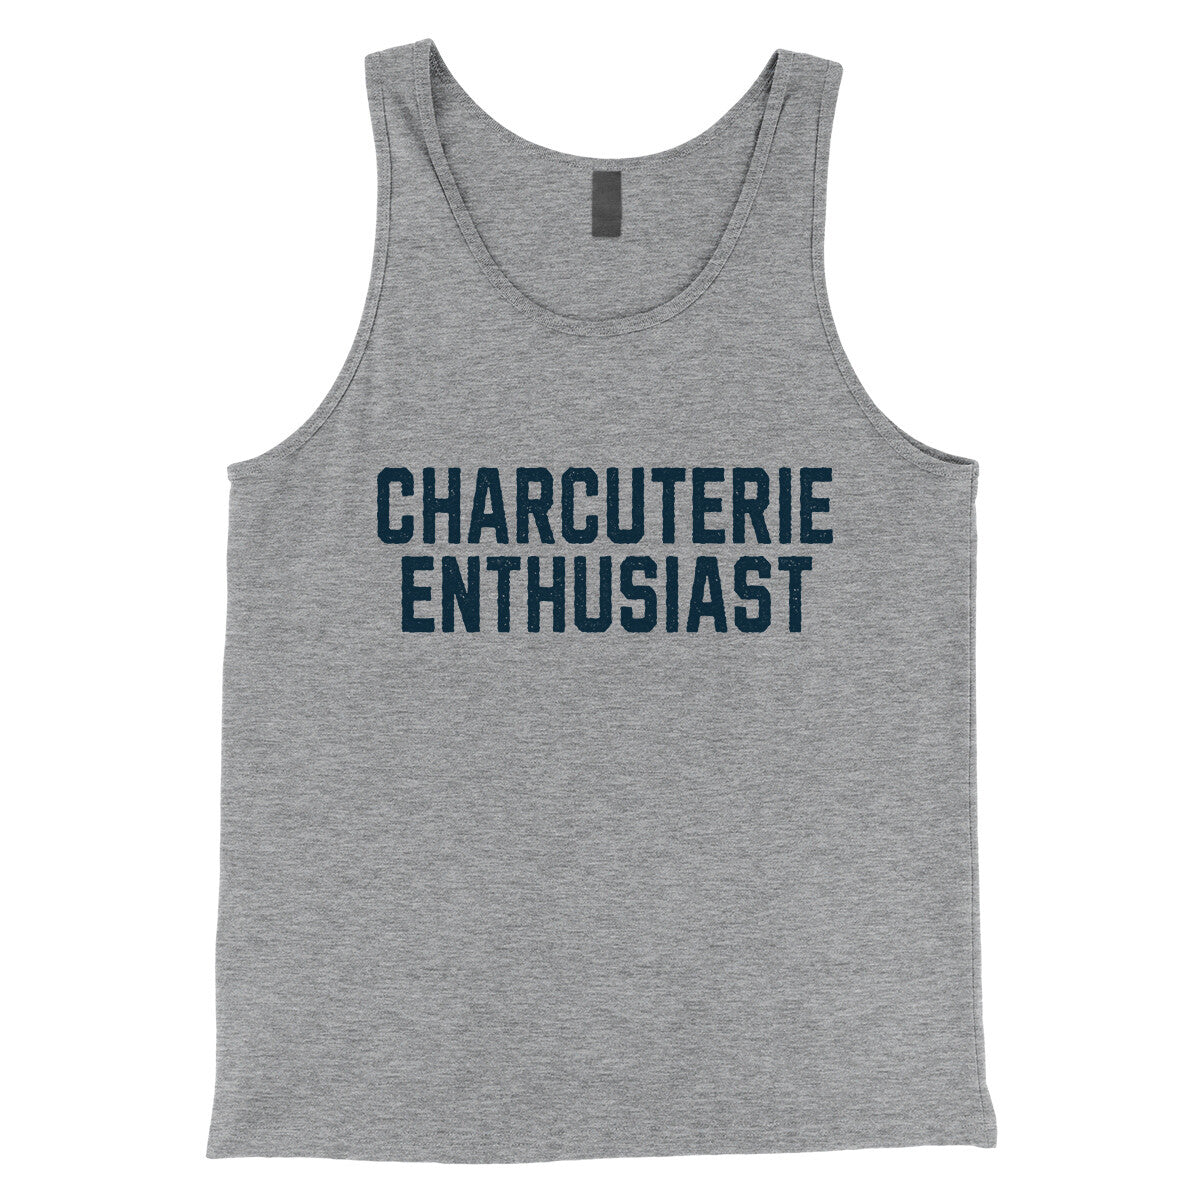 Charcuterie Enthusiast in Athletic Heather Color